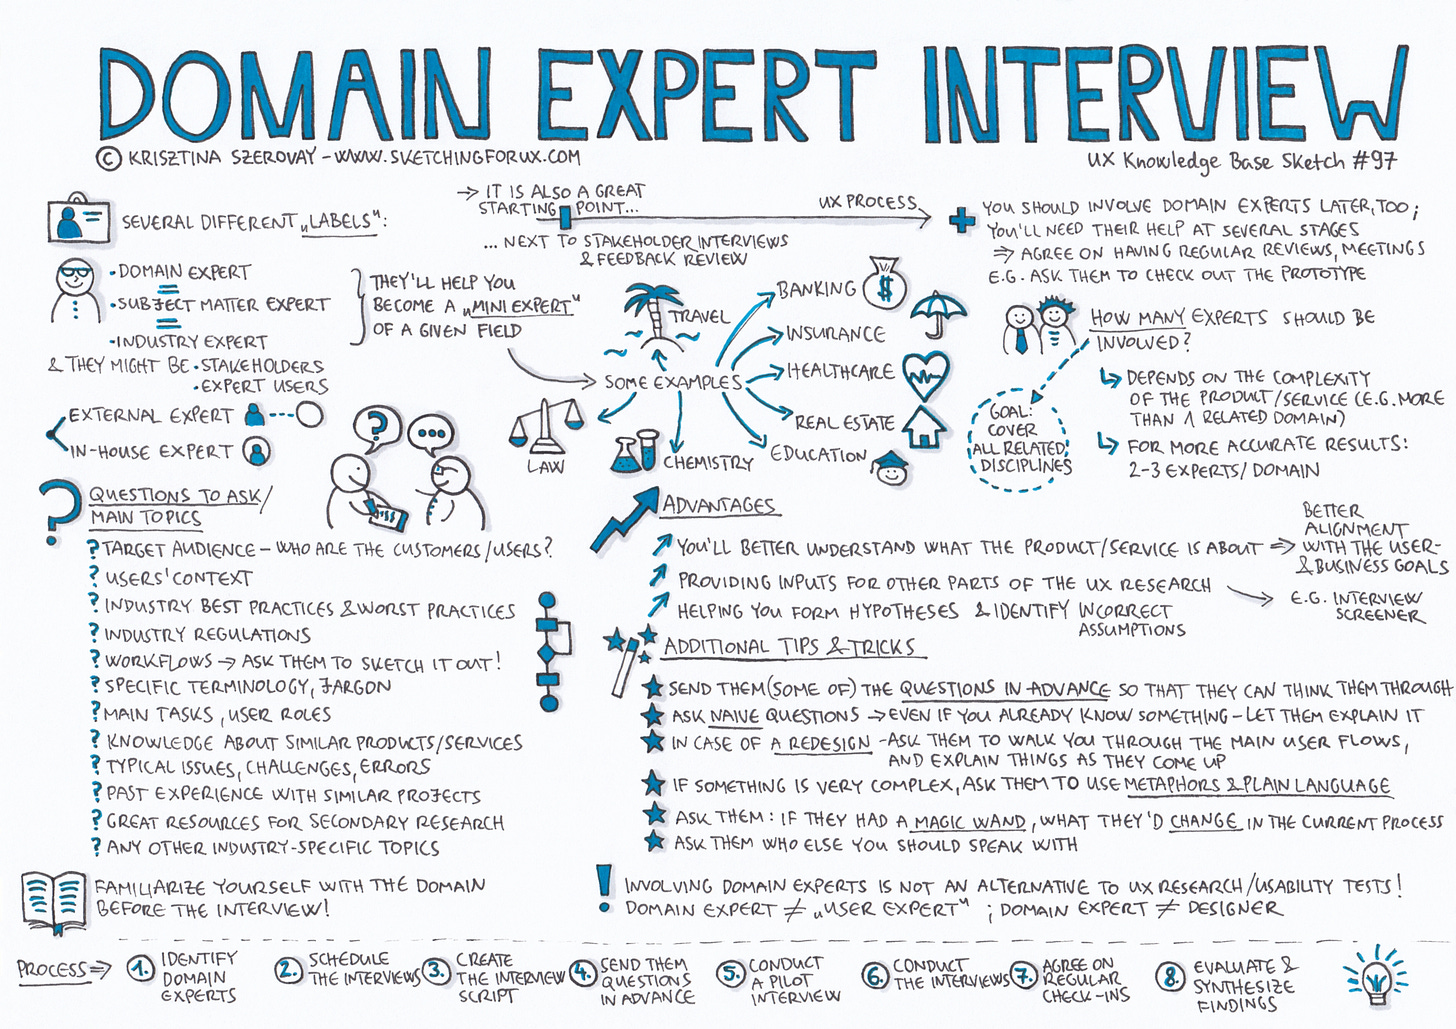 A sketch that covers a lot of the main points regarding expert interviews. These include asking things such as context, sending questions ahead of time, and asking about industry best practices